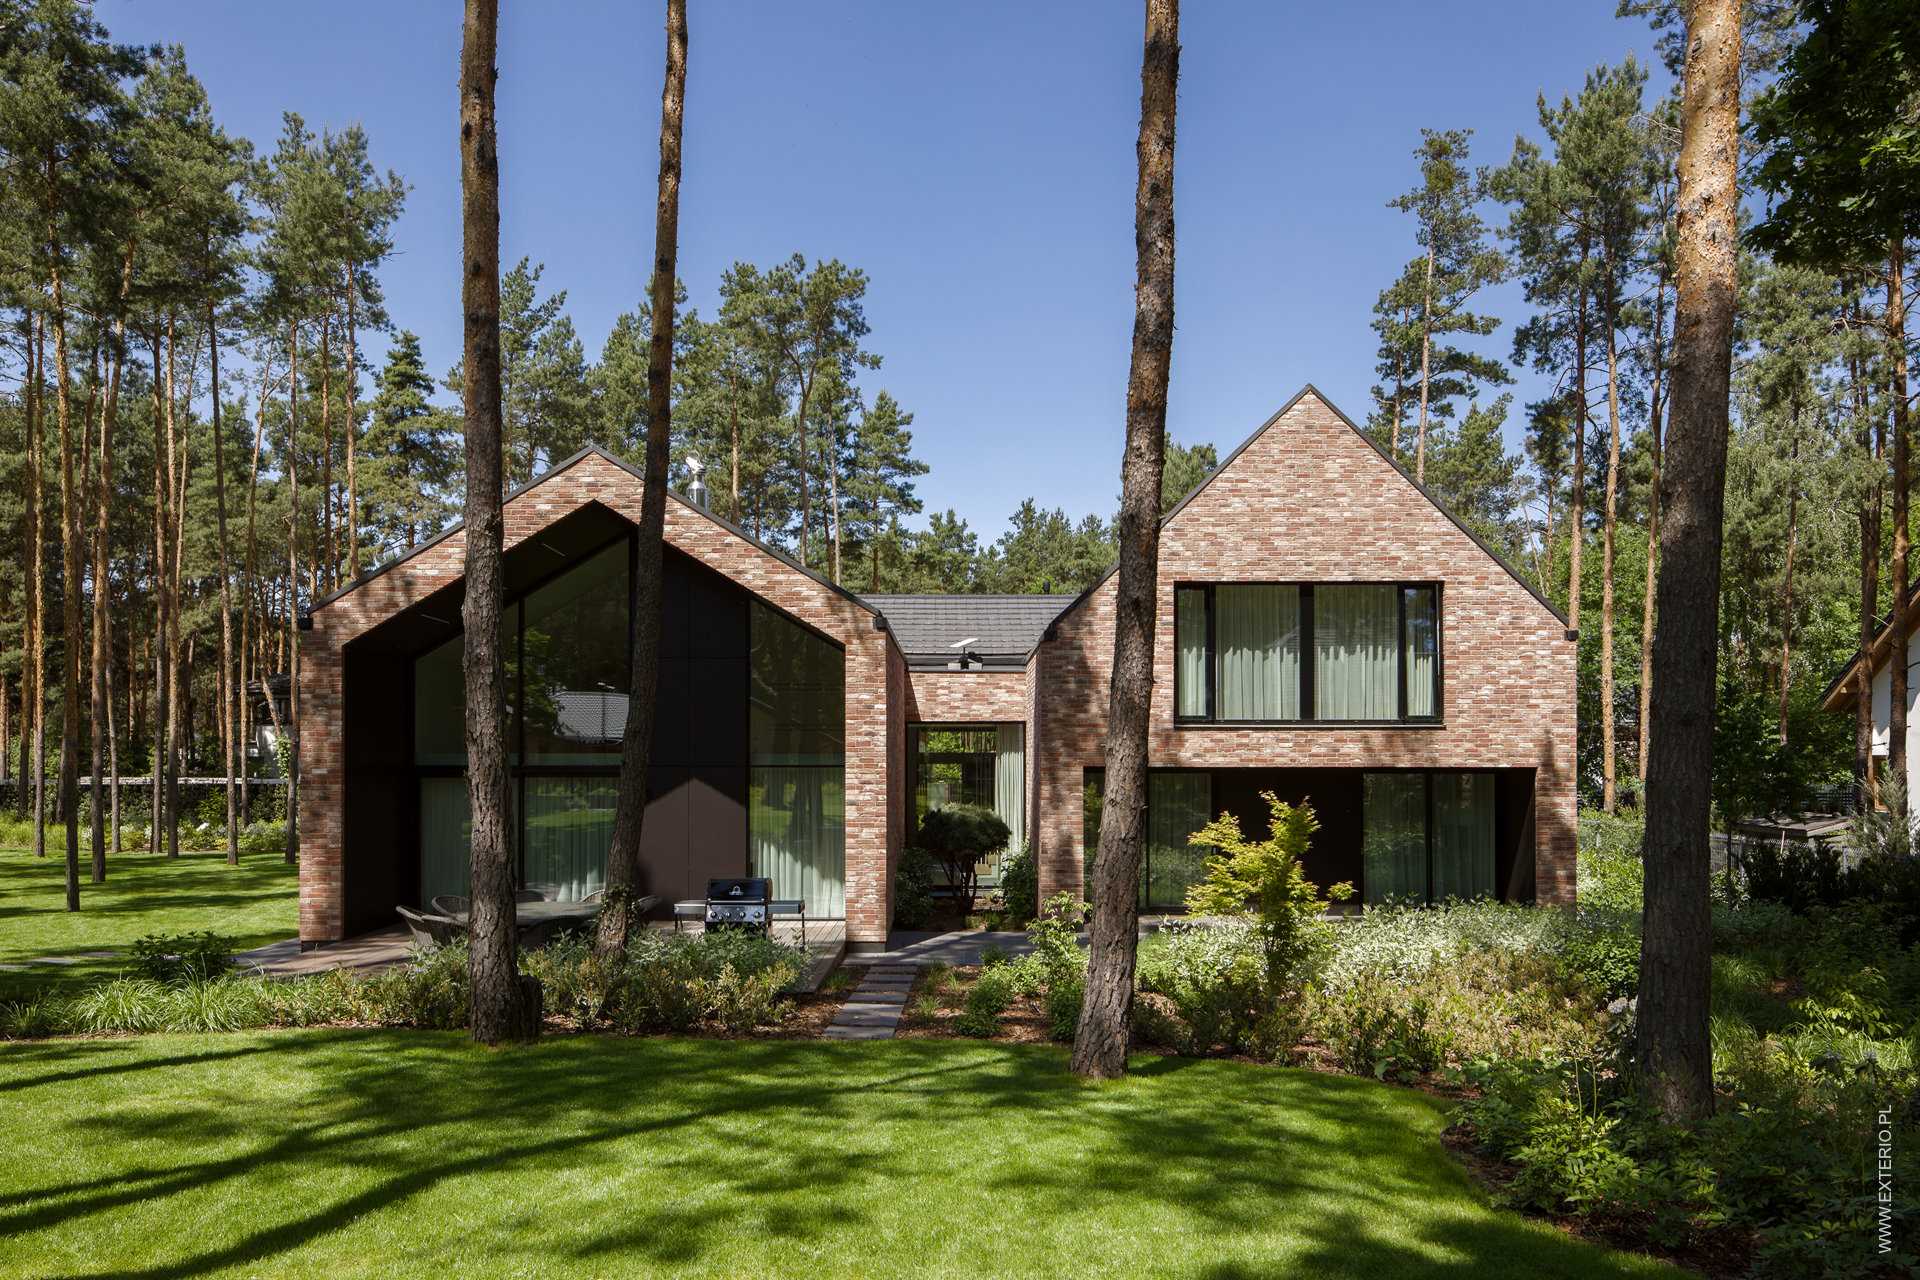 A modern home with a handmade rustic brick exterior, and dark ceramic roof tiles.